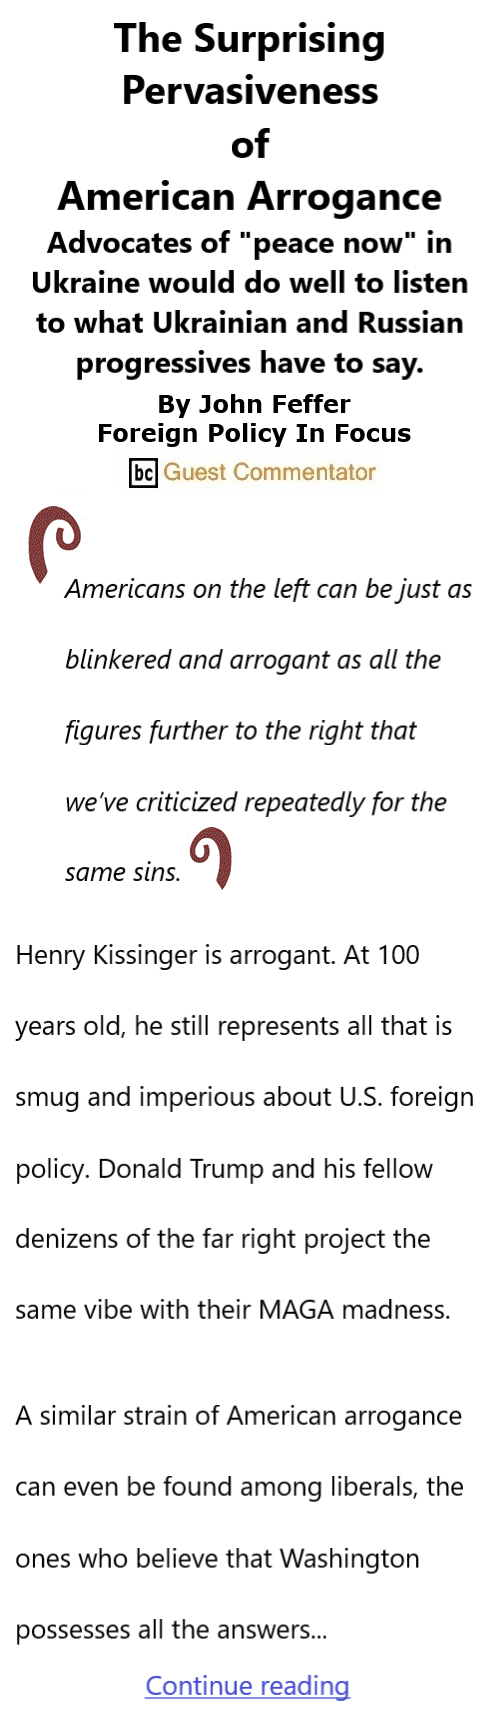 BlackCommentator.com June 8, 2023 - Issue 959: The Surprising Pervasiveness of American Arrogance By John Feffer, Foreign Policy in Focus BC Guest Commentator